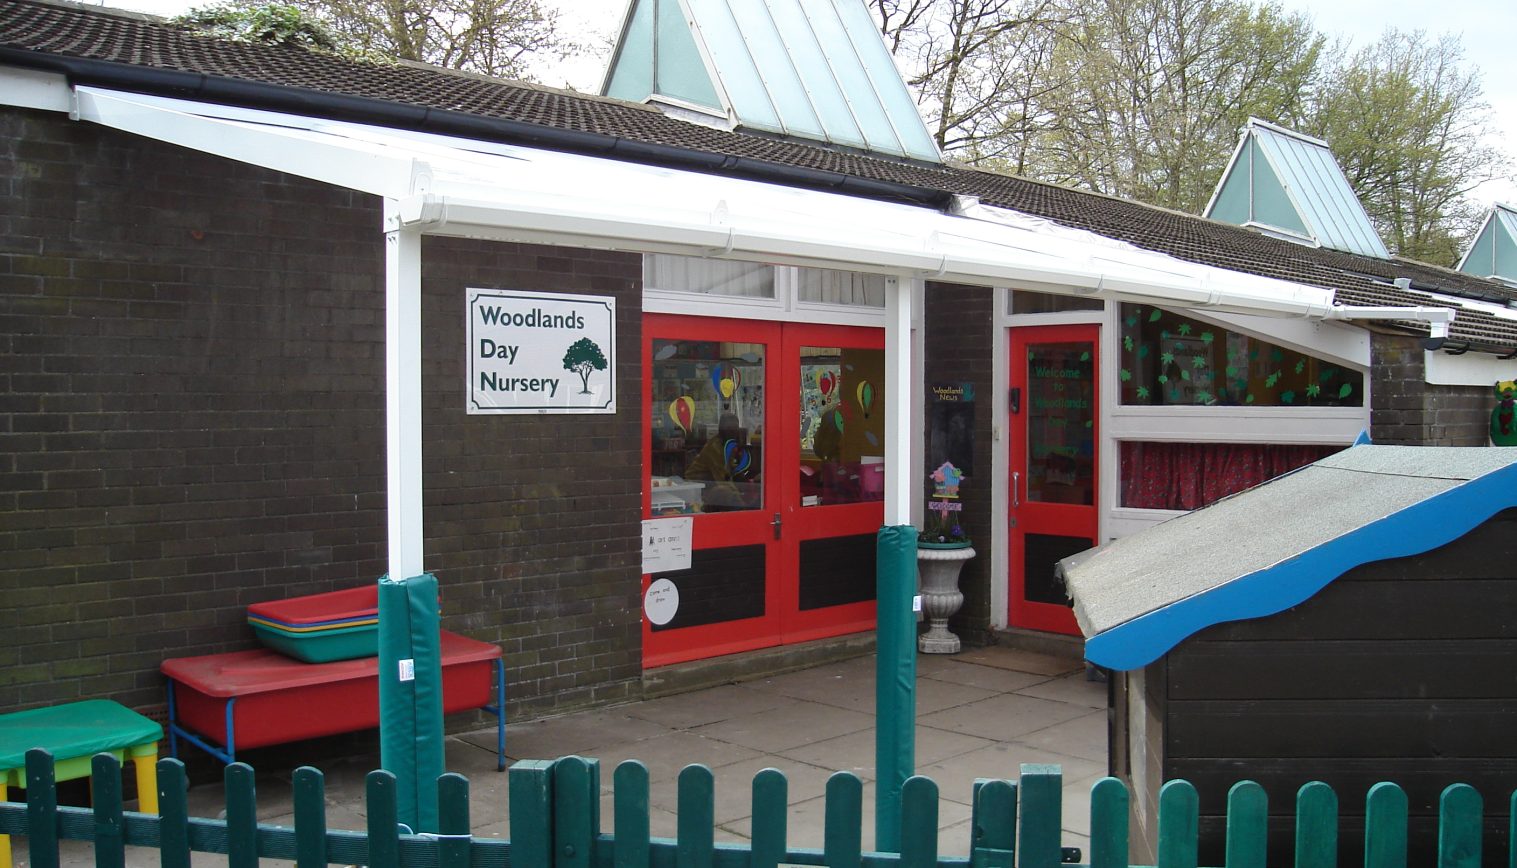 Woodlands Day Nursery – Wall Mounted Canopy